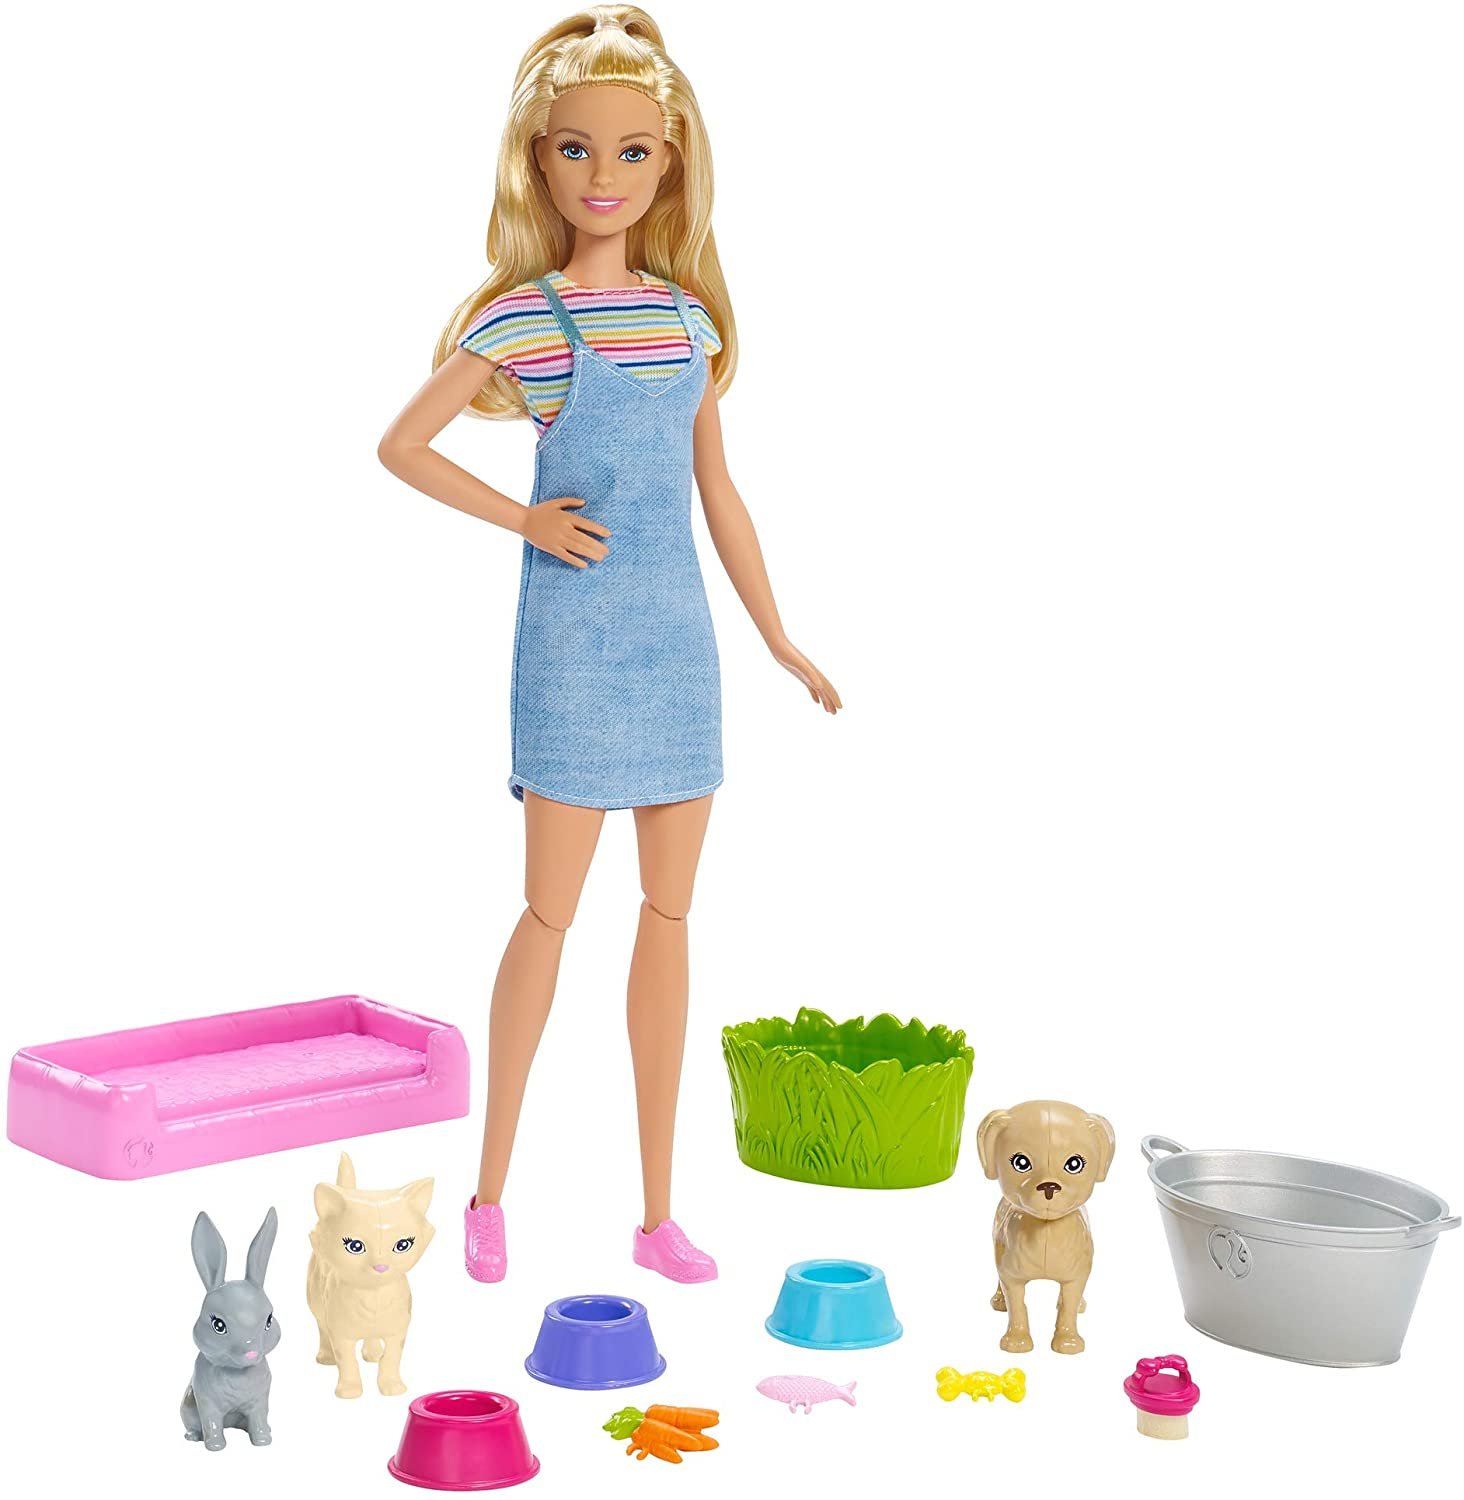 Barbie Play ‘n’ Wash Pets Playset with Blonde Doll,